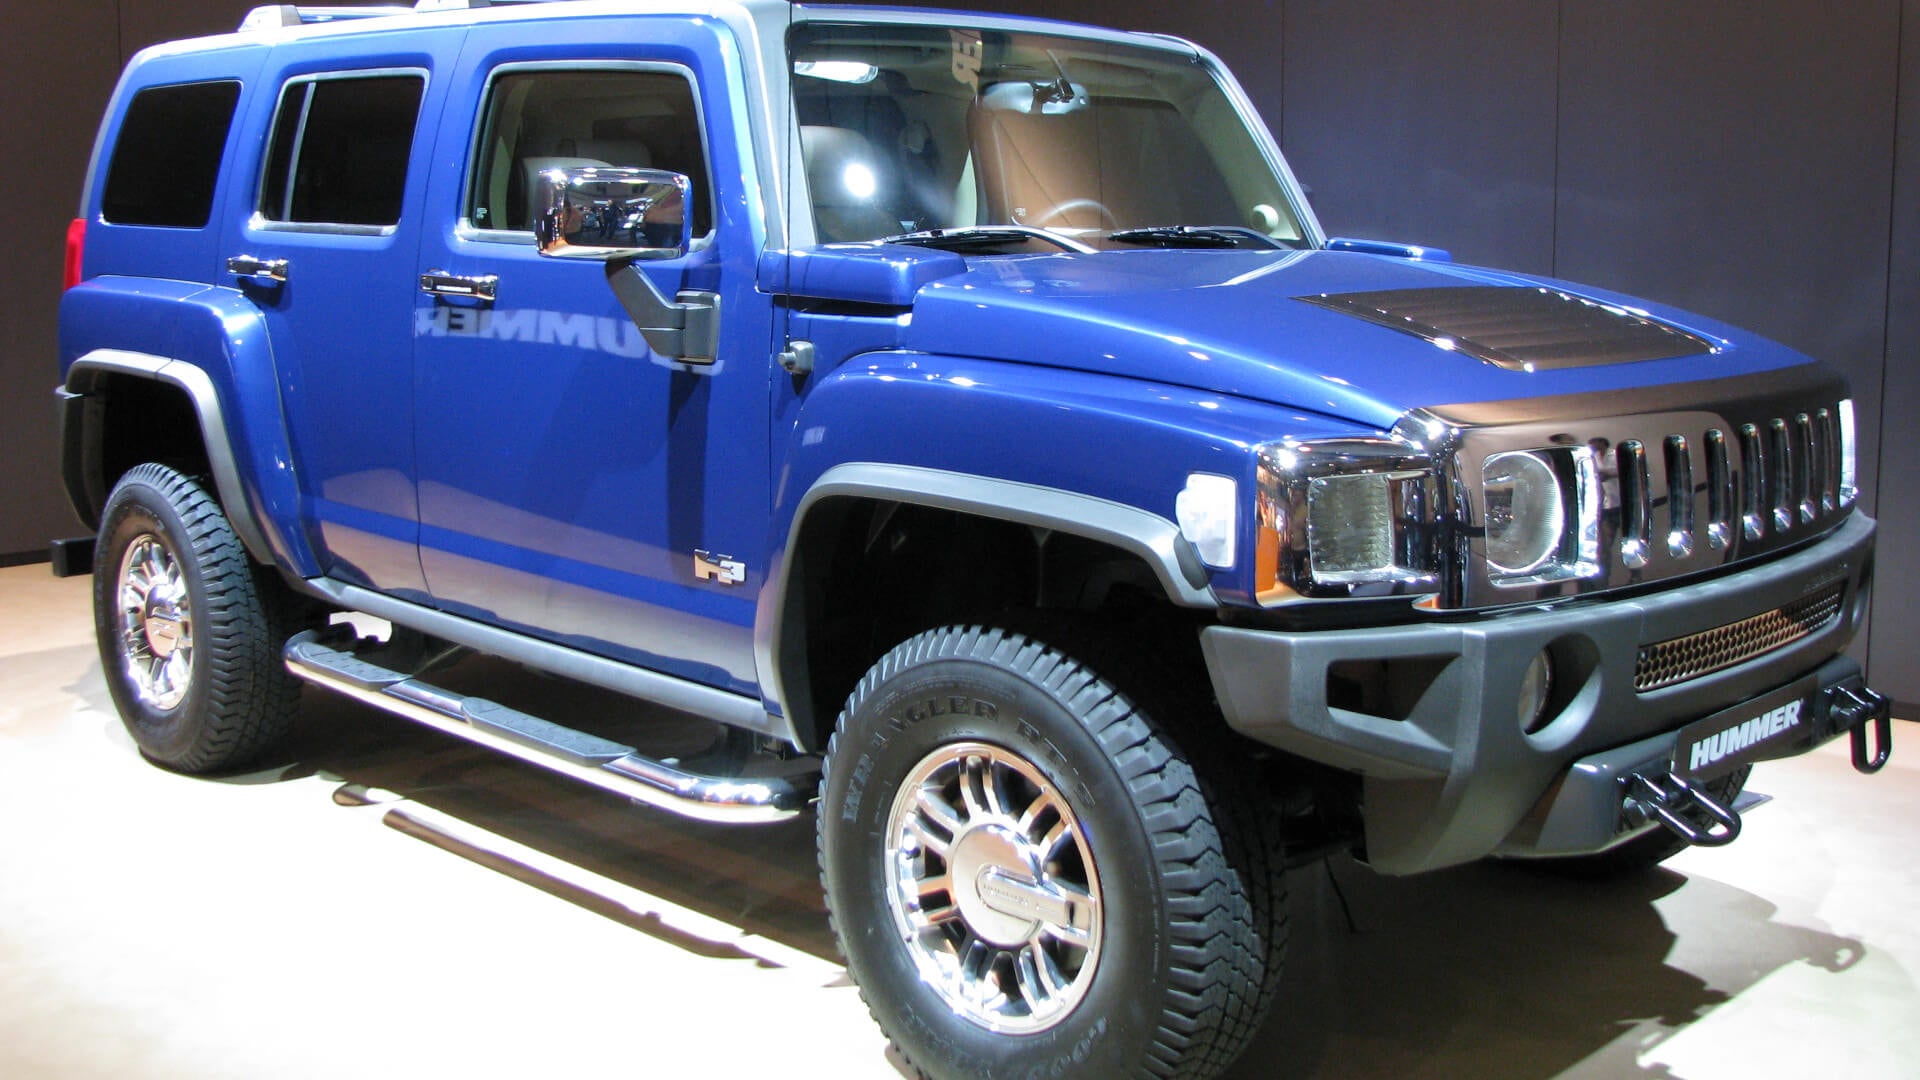 Direct4x4 Accessories for Hummer H3 Vehicles